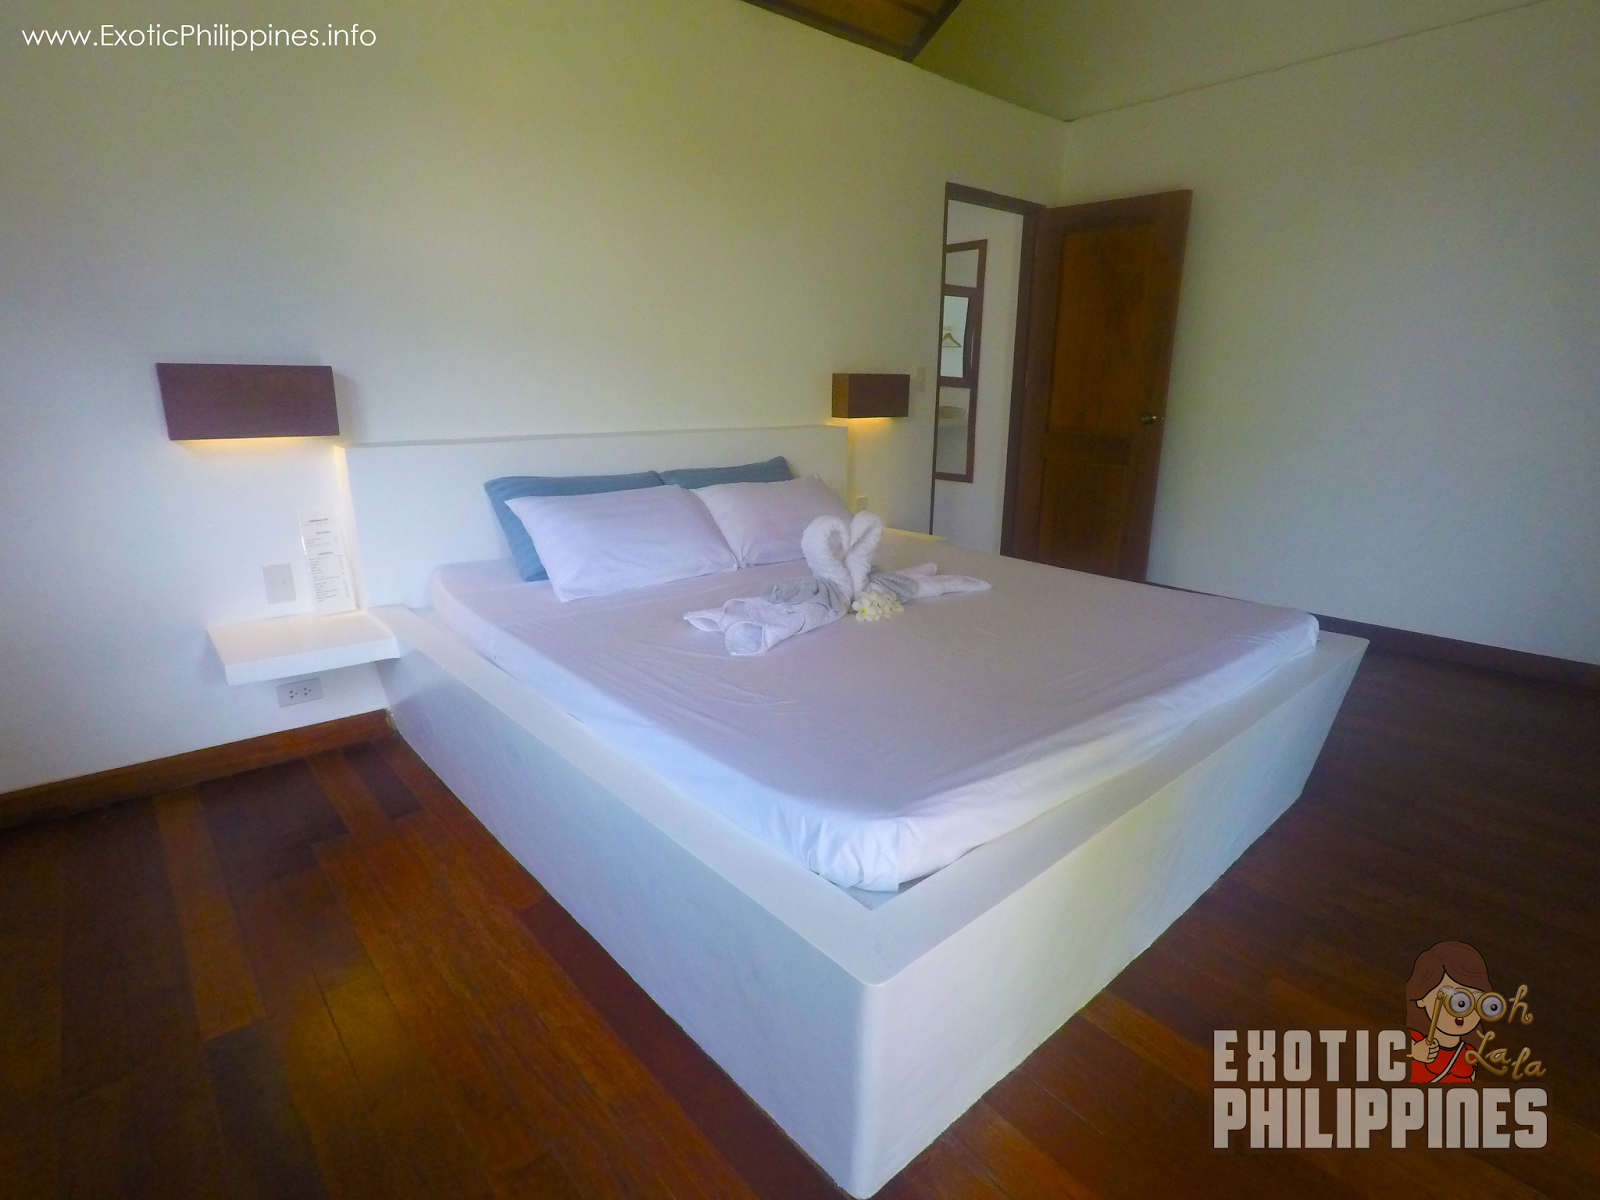 Villa Kalachuchi bed and breakfast in Puerto Princesa City Palawan near airport exotic philippines travel blog blogger hotel review with swimming pool